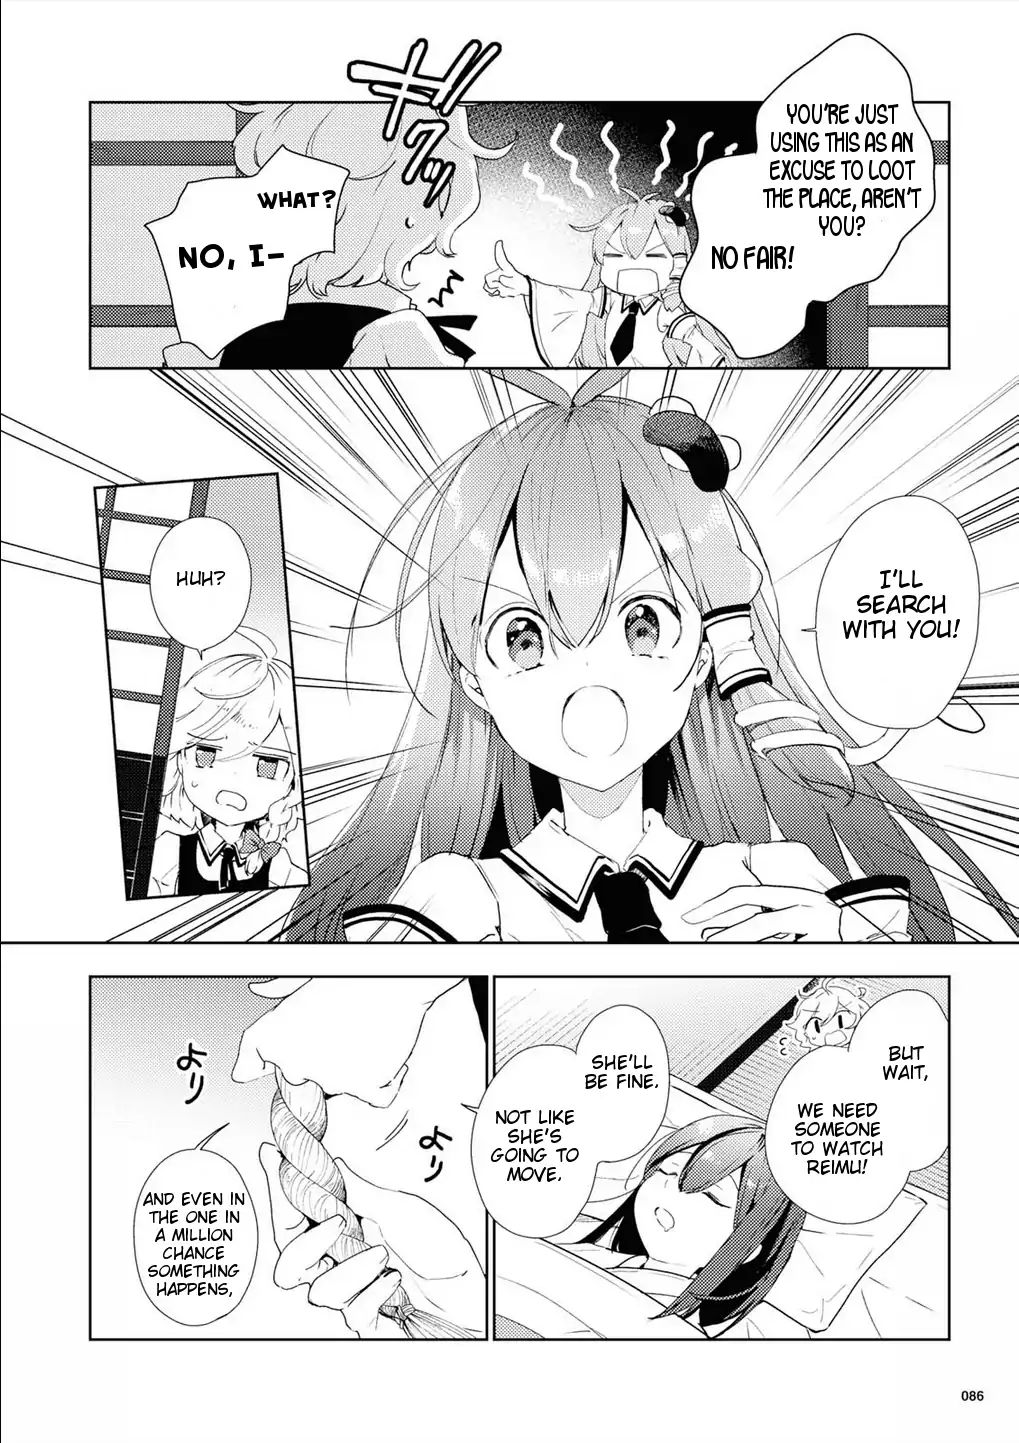 Touhou Ibarakasen - Wild and Horned Hermit Vol.10 Chapter 48: Not Stopping To Ask For Direction In The Land Of Darkness